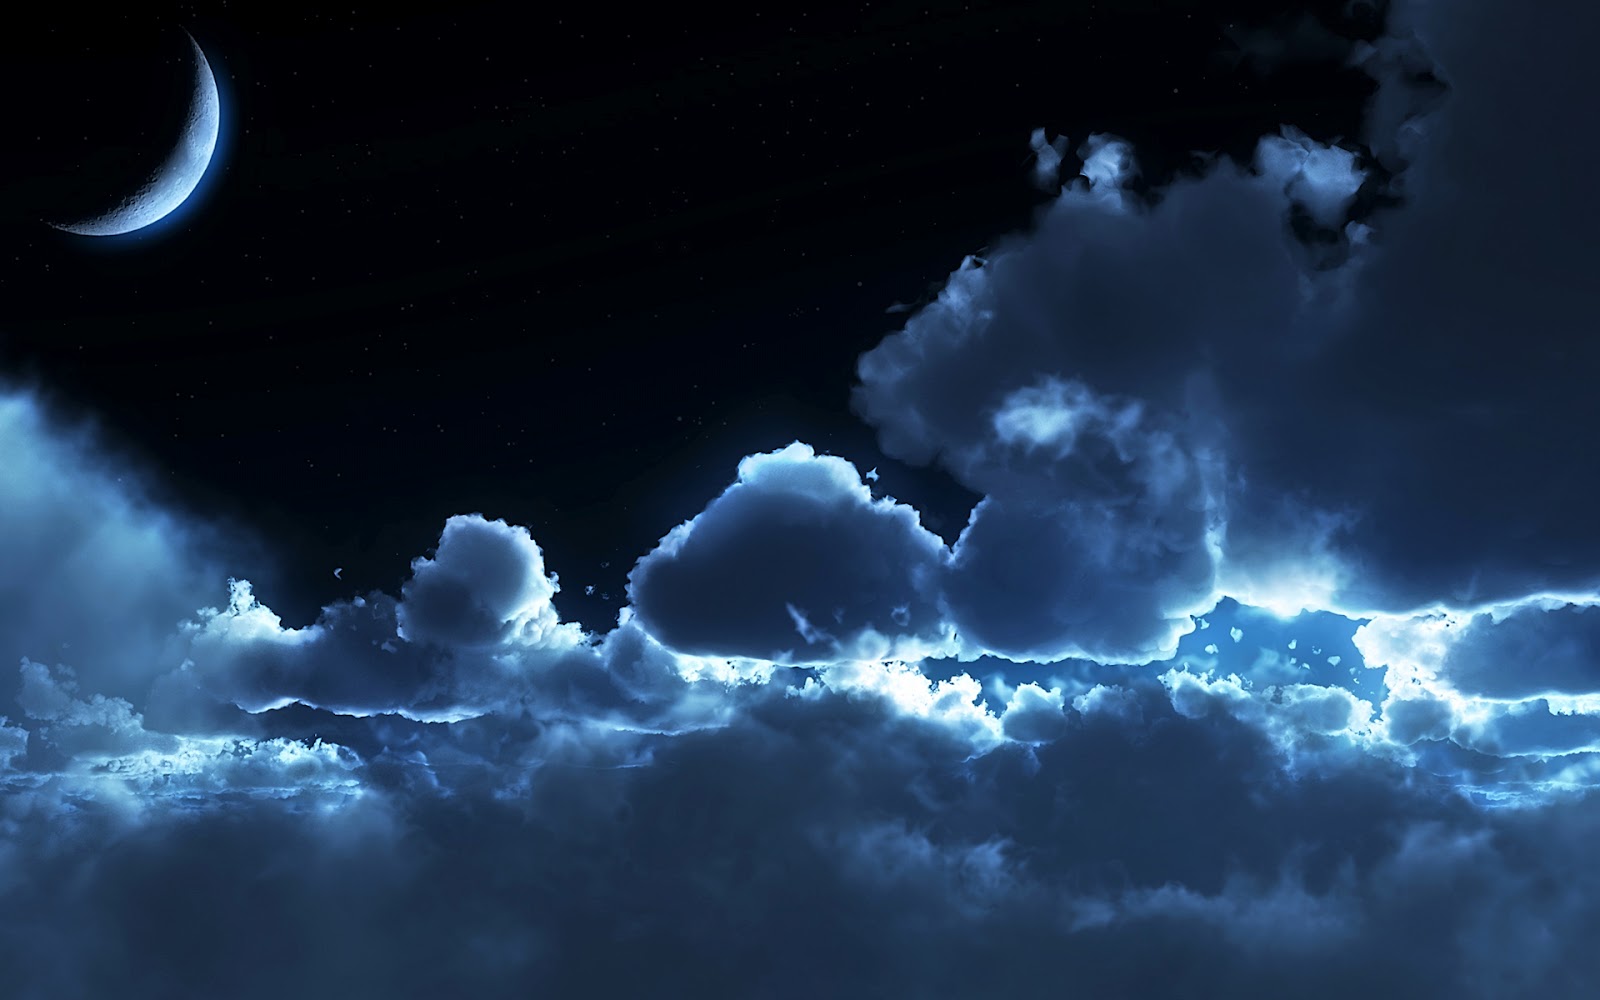 Wallsheets Above Clouds At Night Desktop Wallpaper And Background